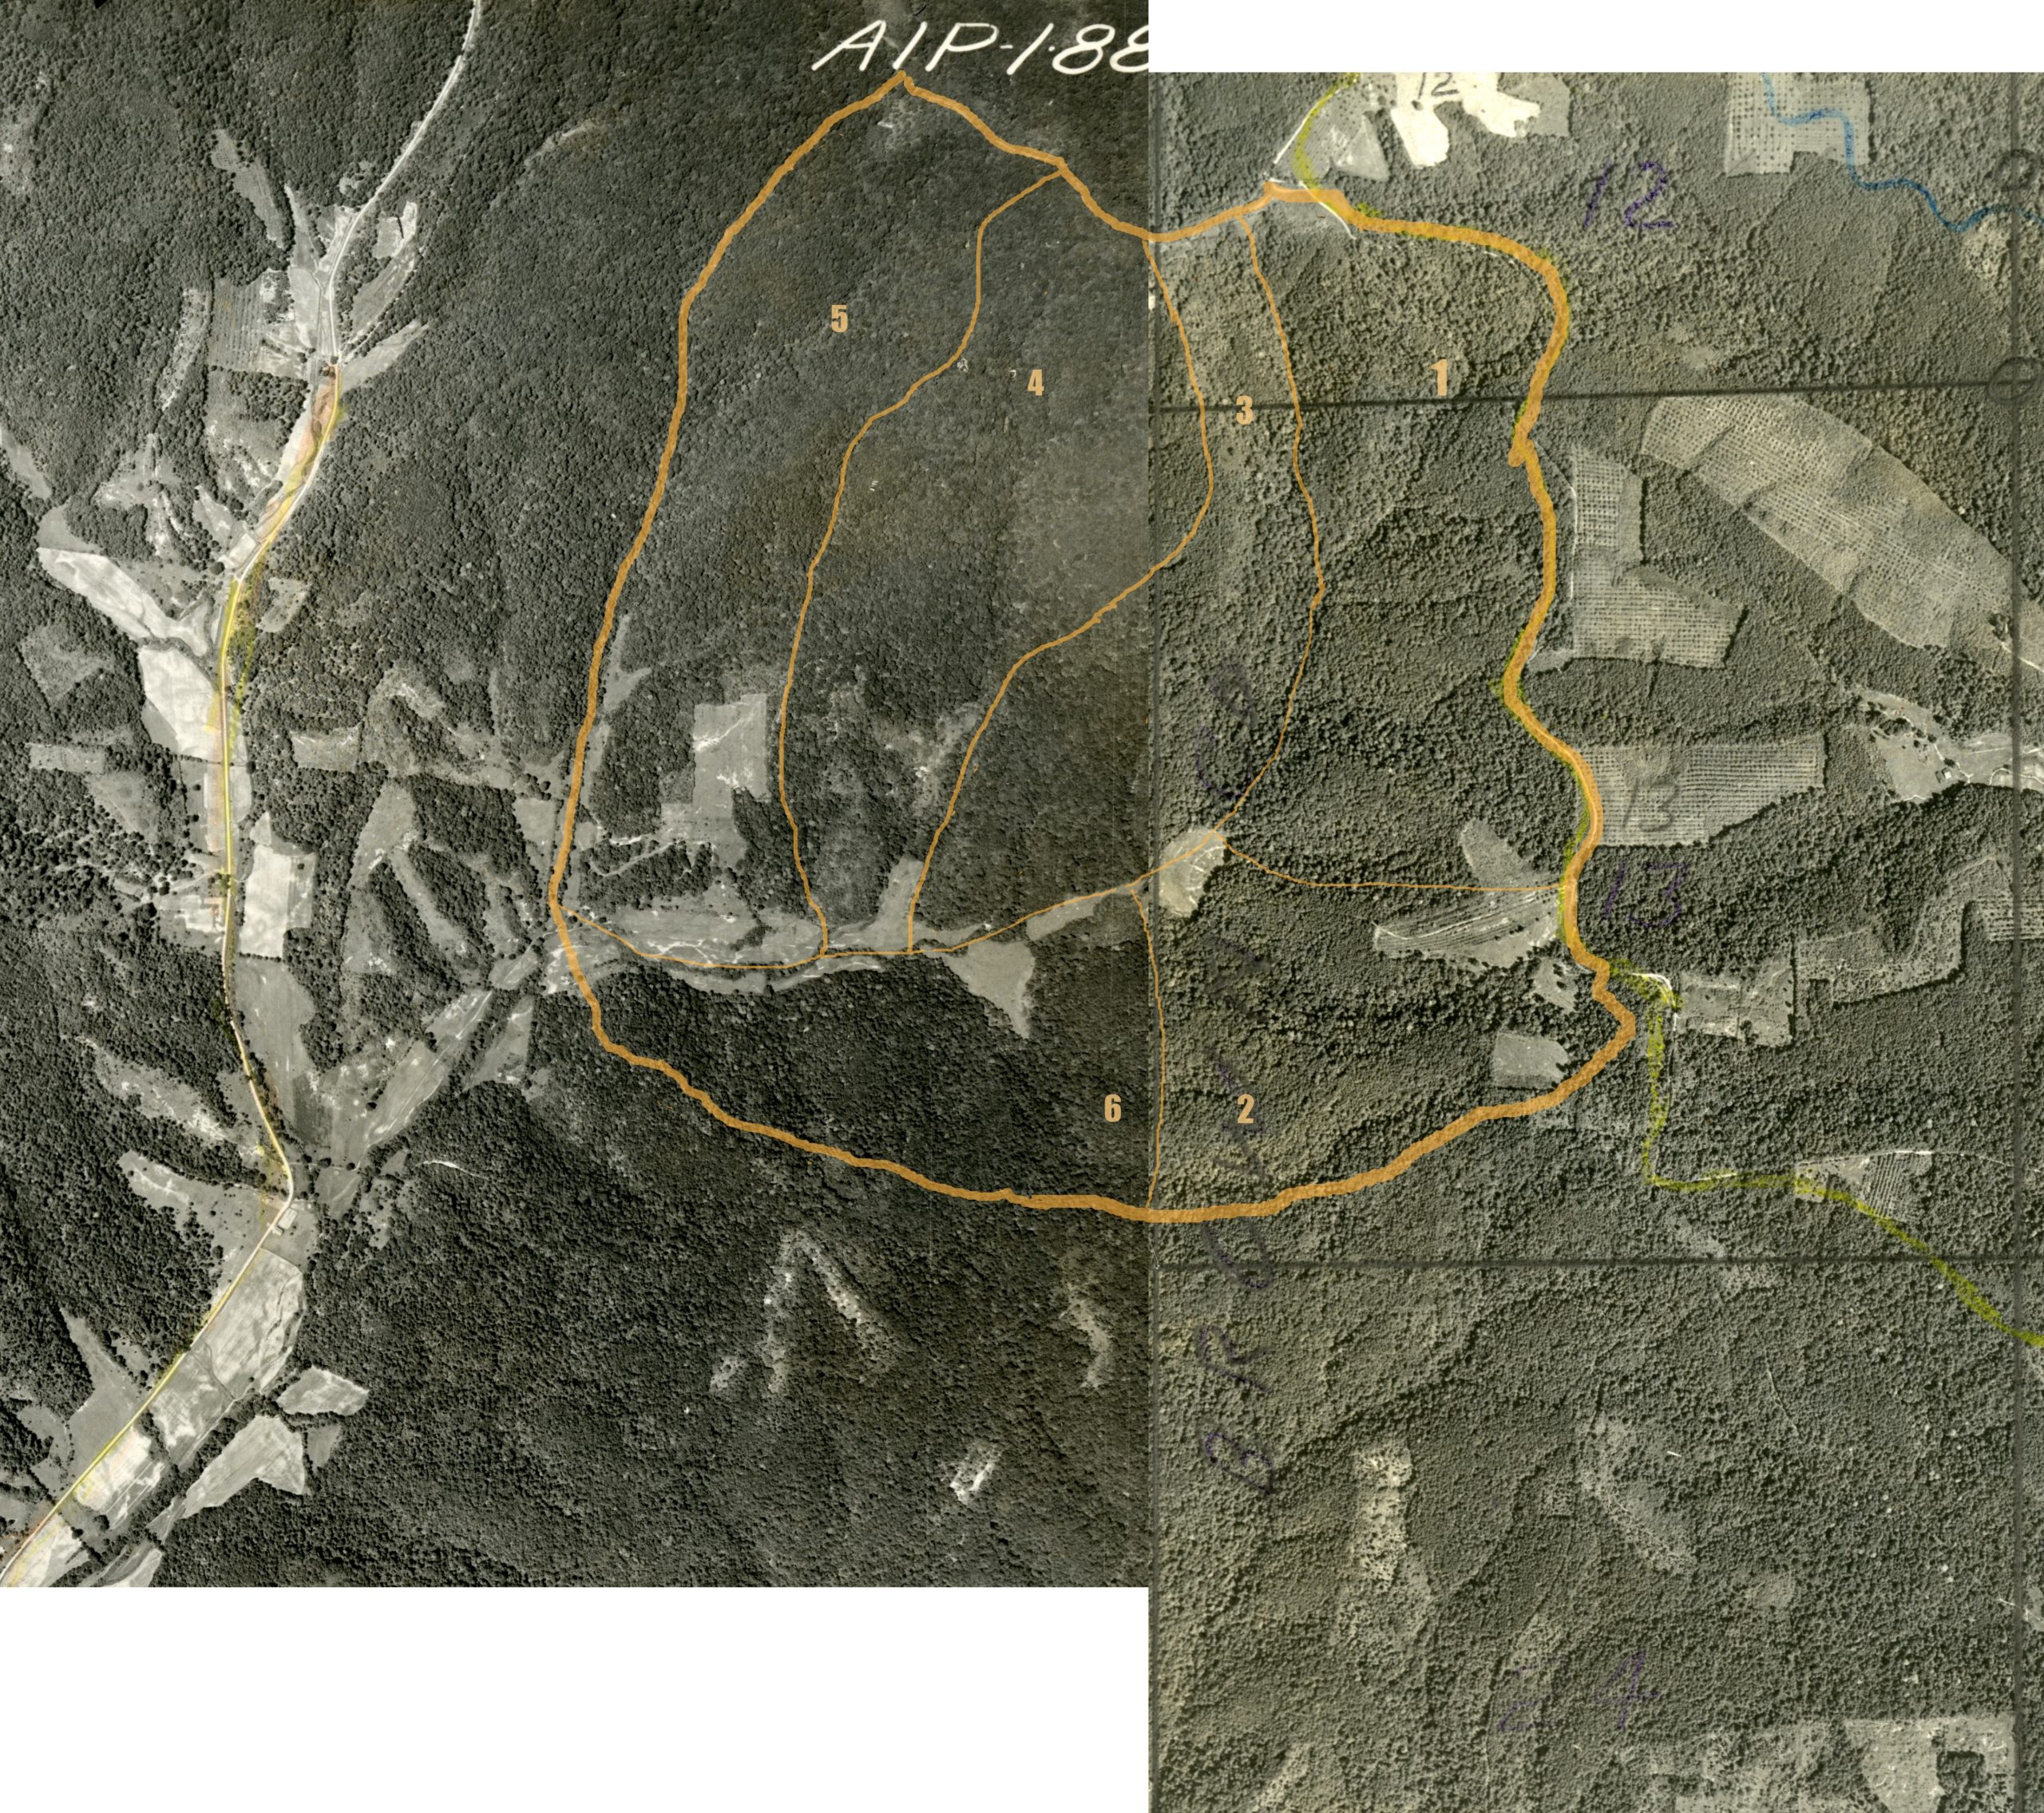 Aerial shot of Yellowwood and Morgan-Monroe State Forests from 1939 with EcoBlitz outlines added.